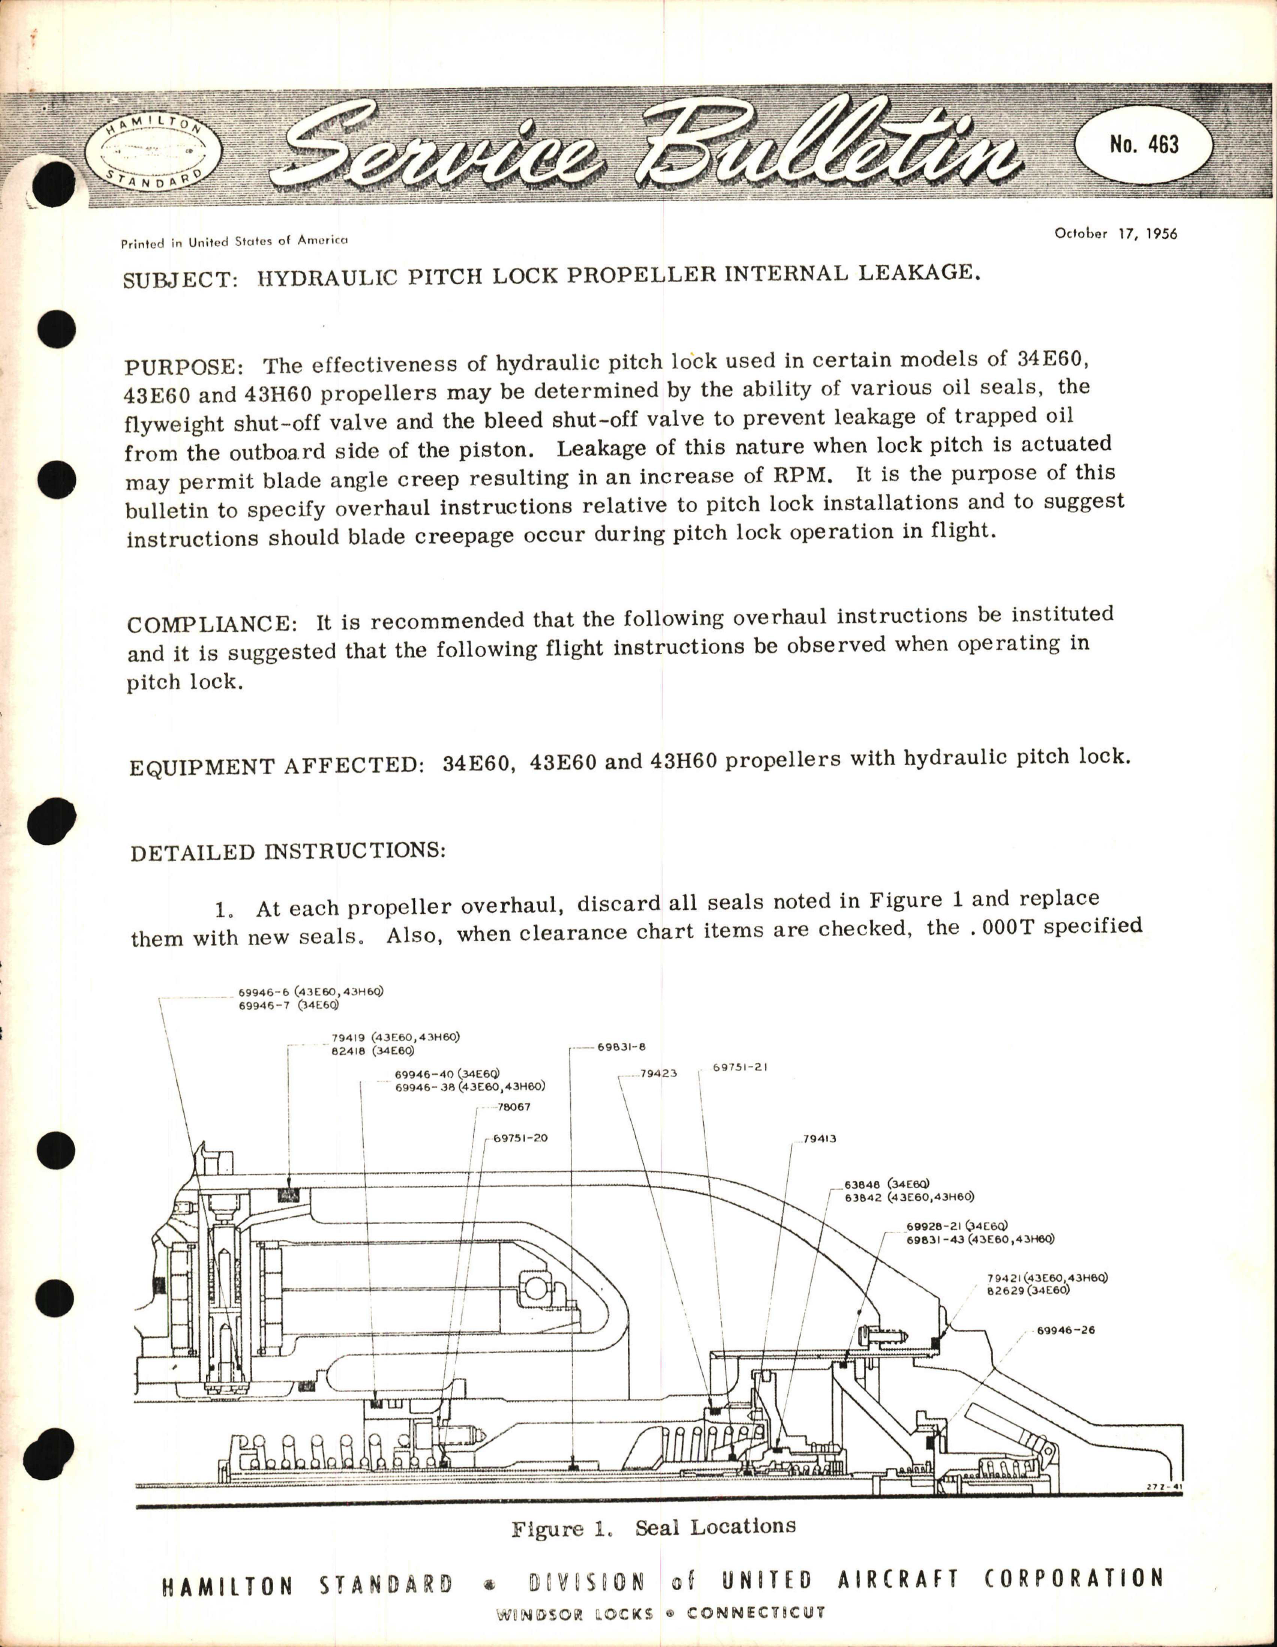 Sample page 1 from AirCorps Library document: Hydraulic Pitch Lock Propeller Internal Leakage